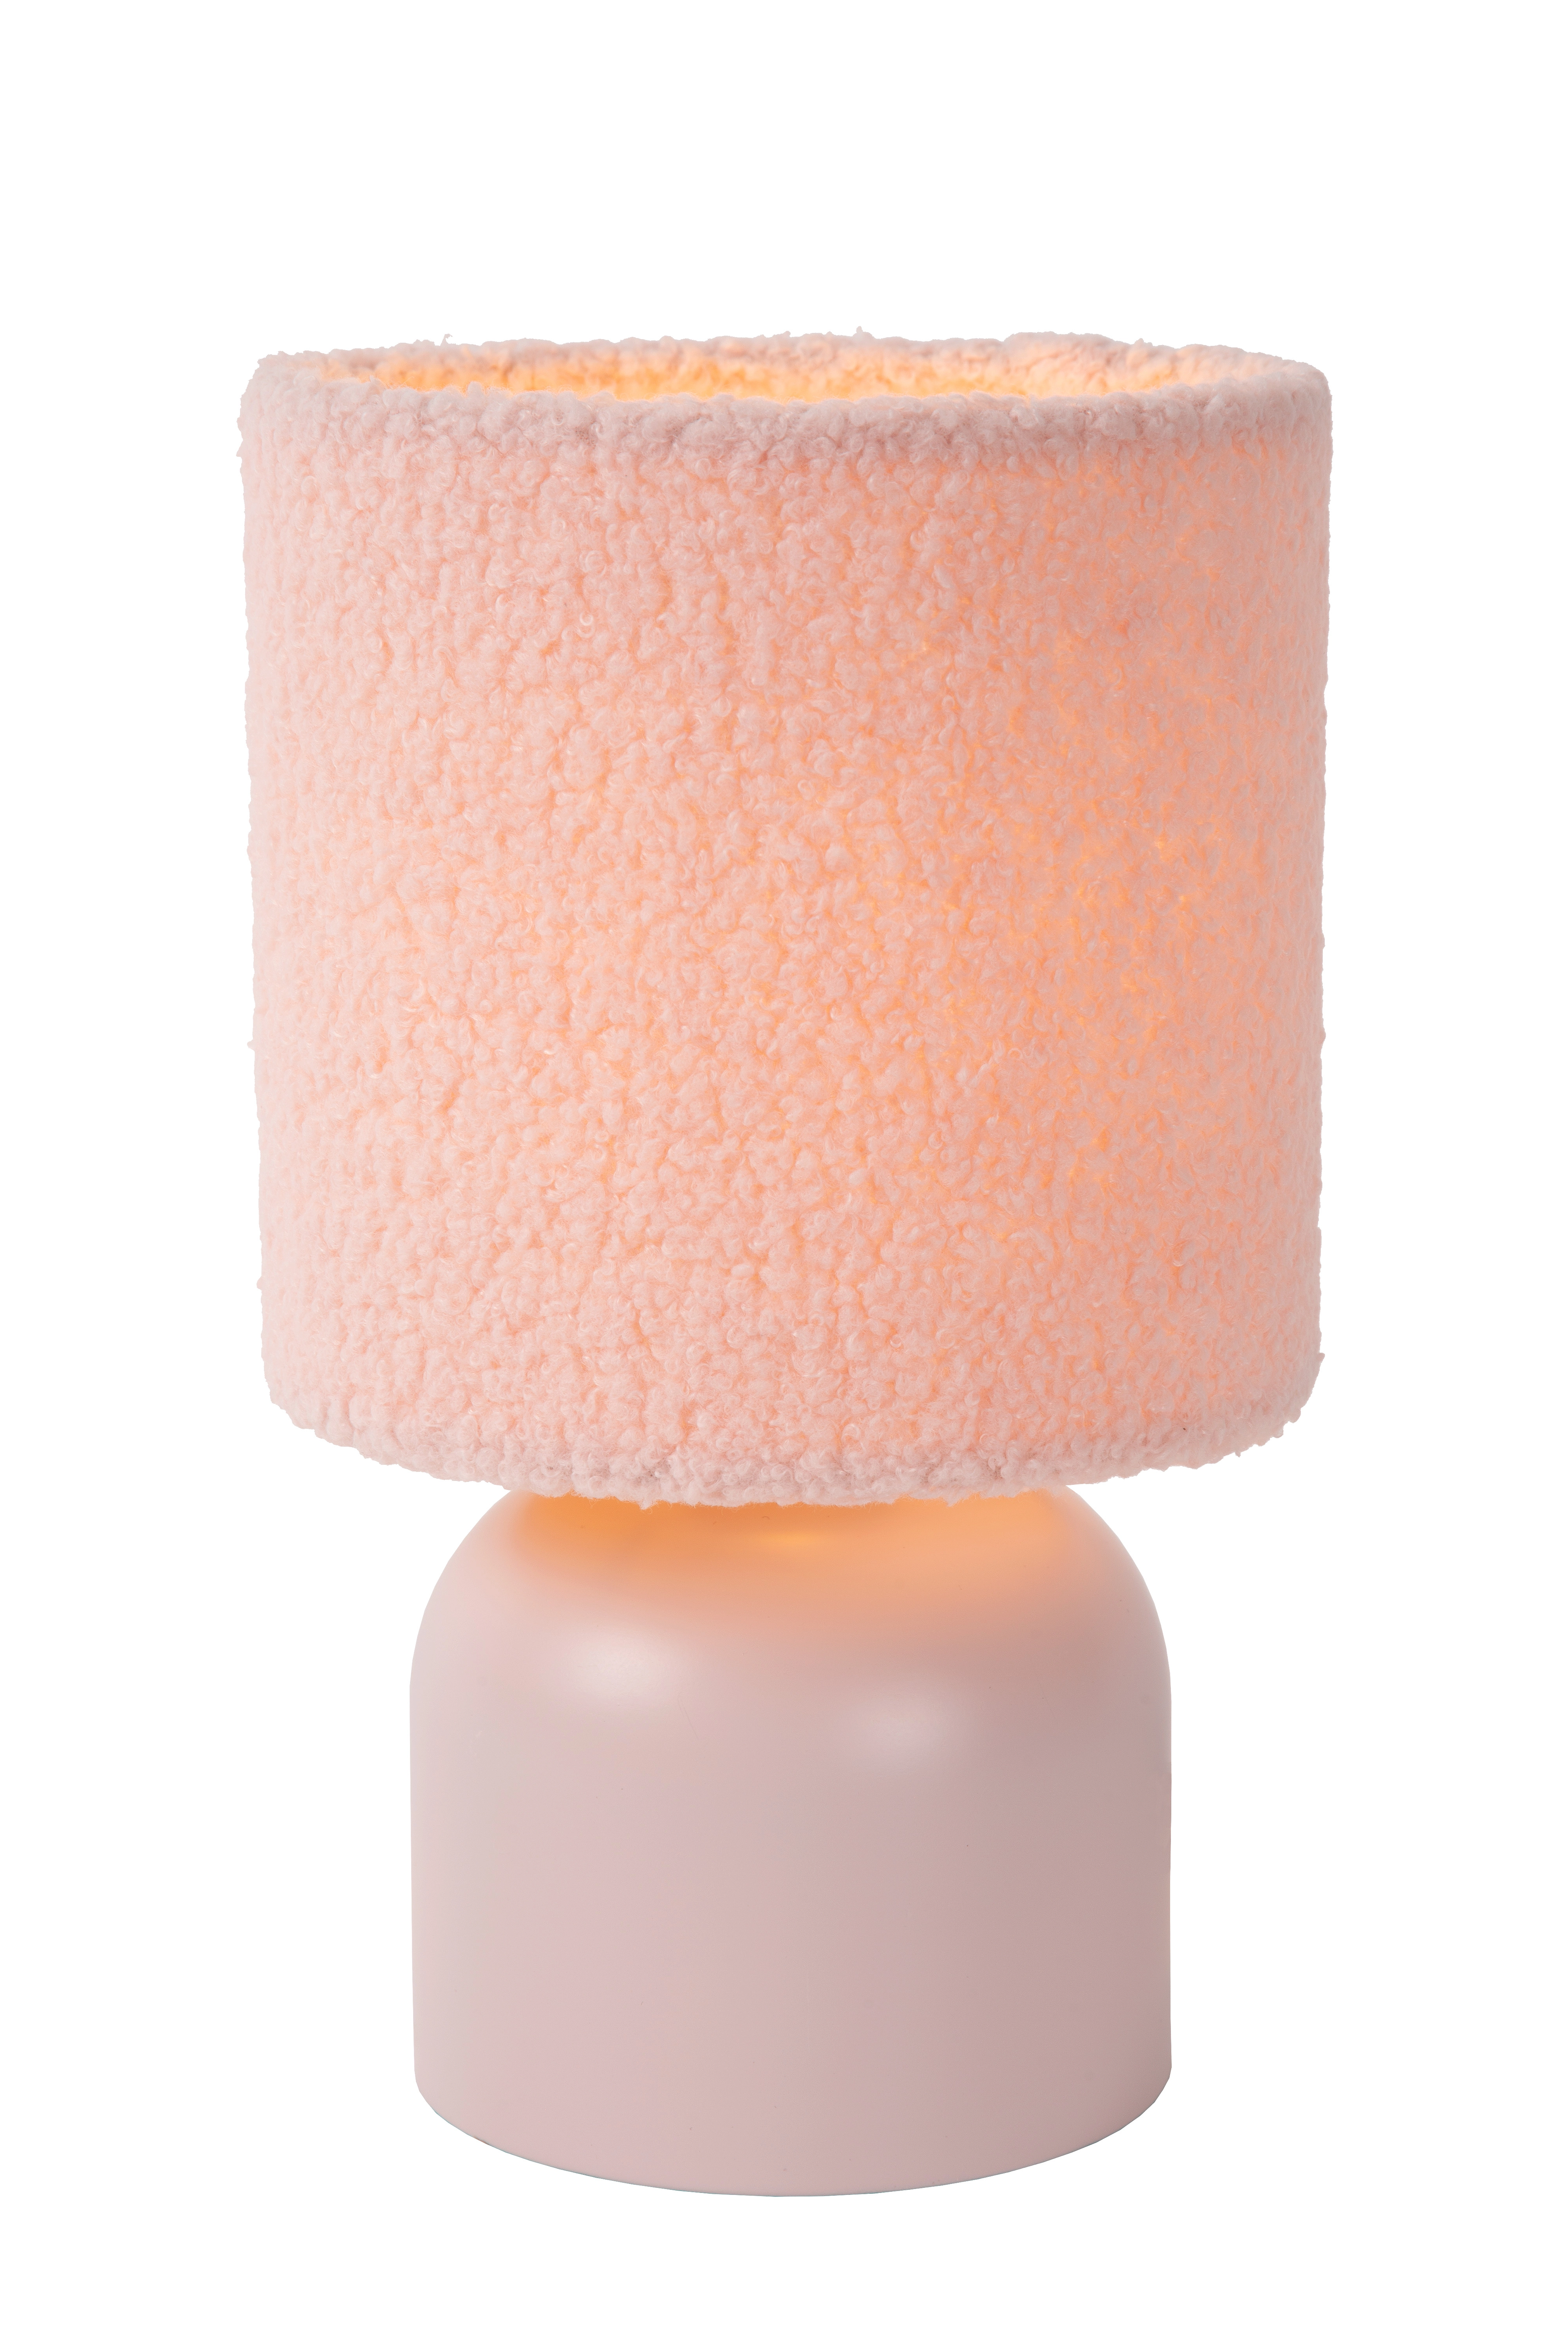 LU 10516/01/66 Lucide WOOLLY - Table lamp - Ø 16 cm - 1xE14 - Pink